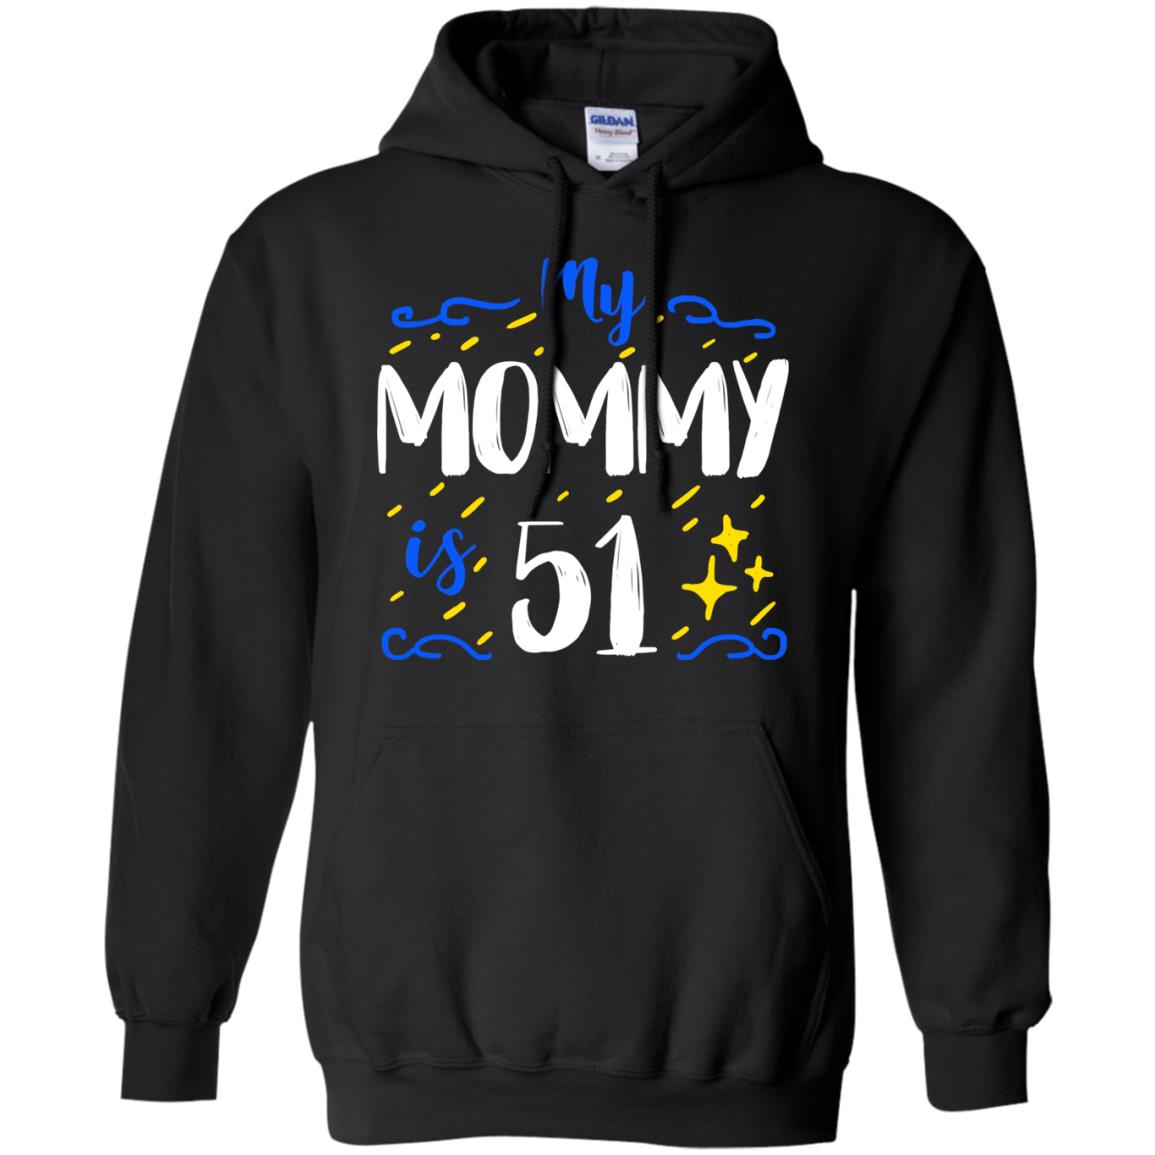 My Mommy Is 51 51st Birthday Mommy Shirt For Sons Or DaughtersG185 Gildan Pullover Hoodie 8 oz.